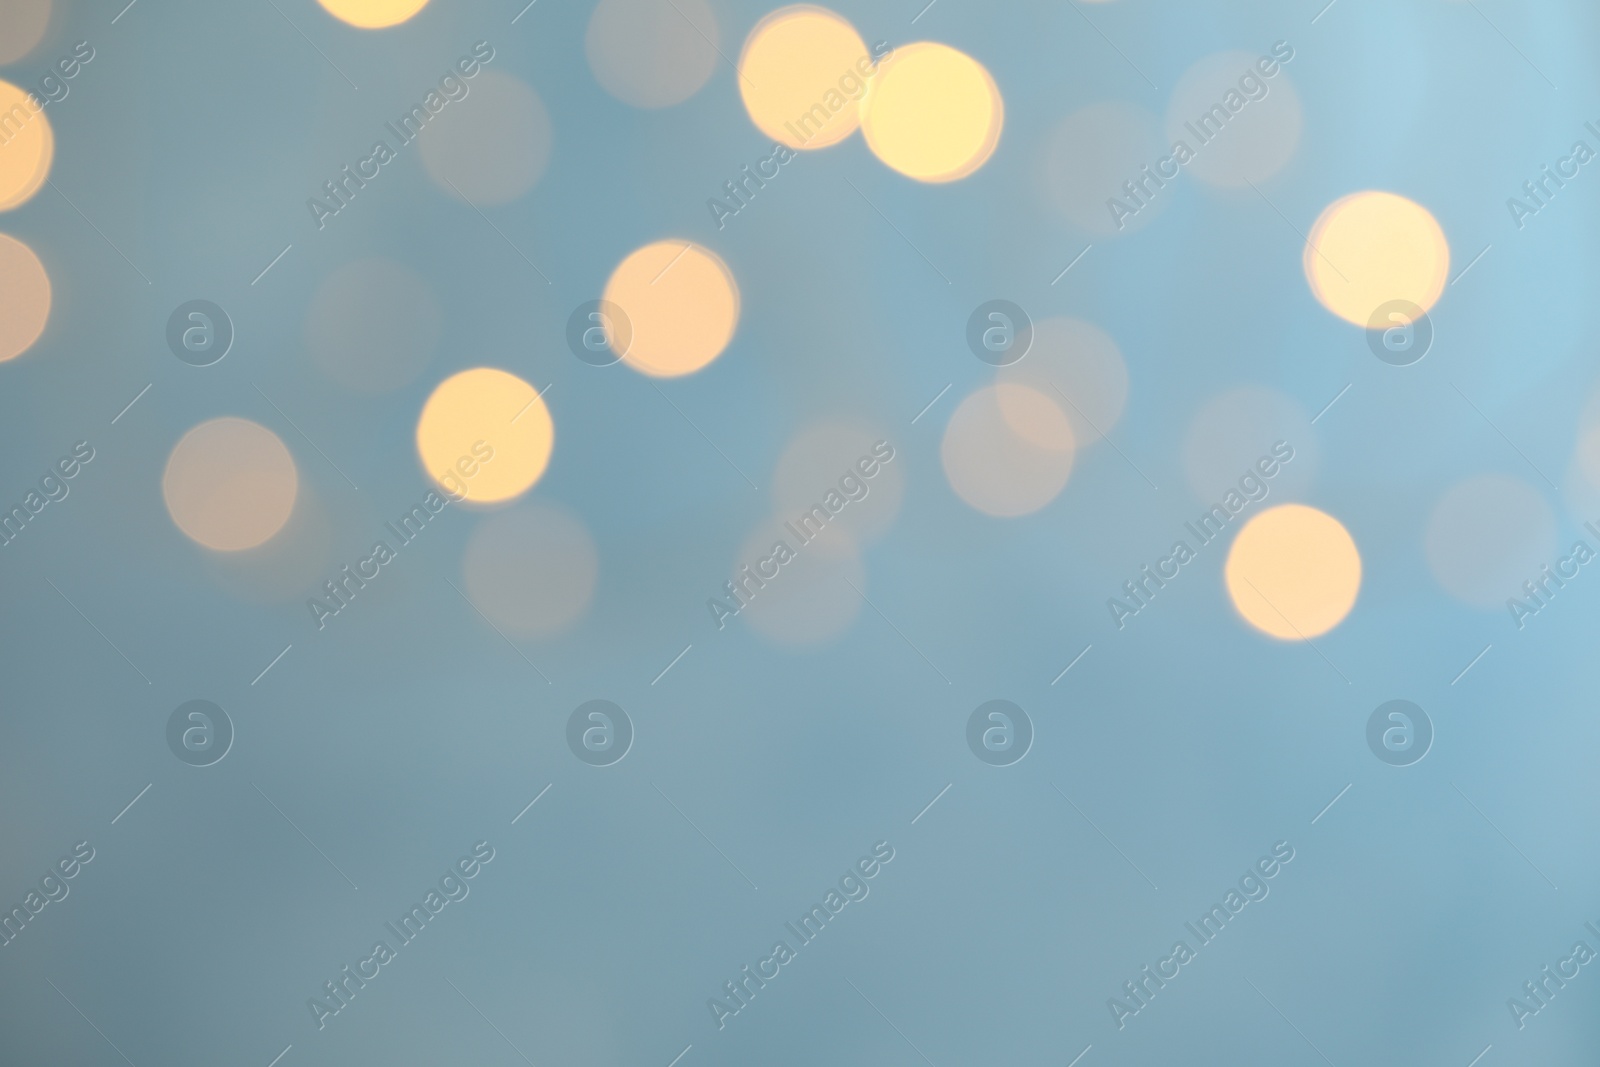 Photo of Blurred view of festive lights on light blue background. Bokeh effect